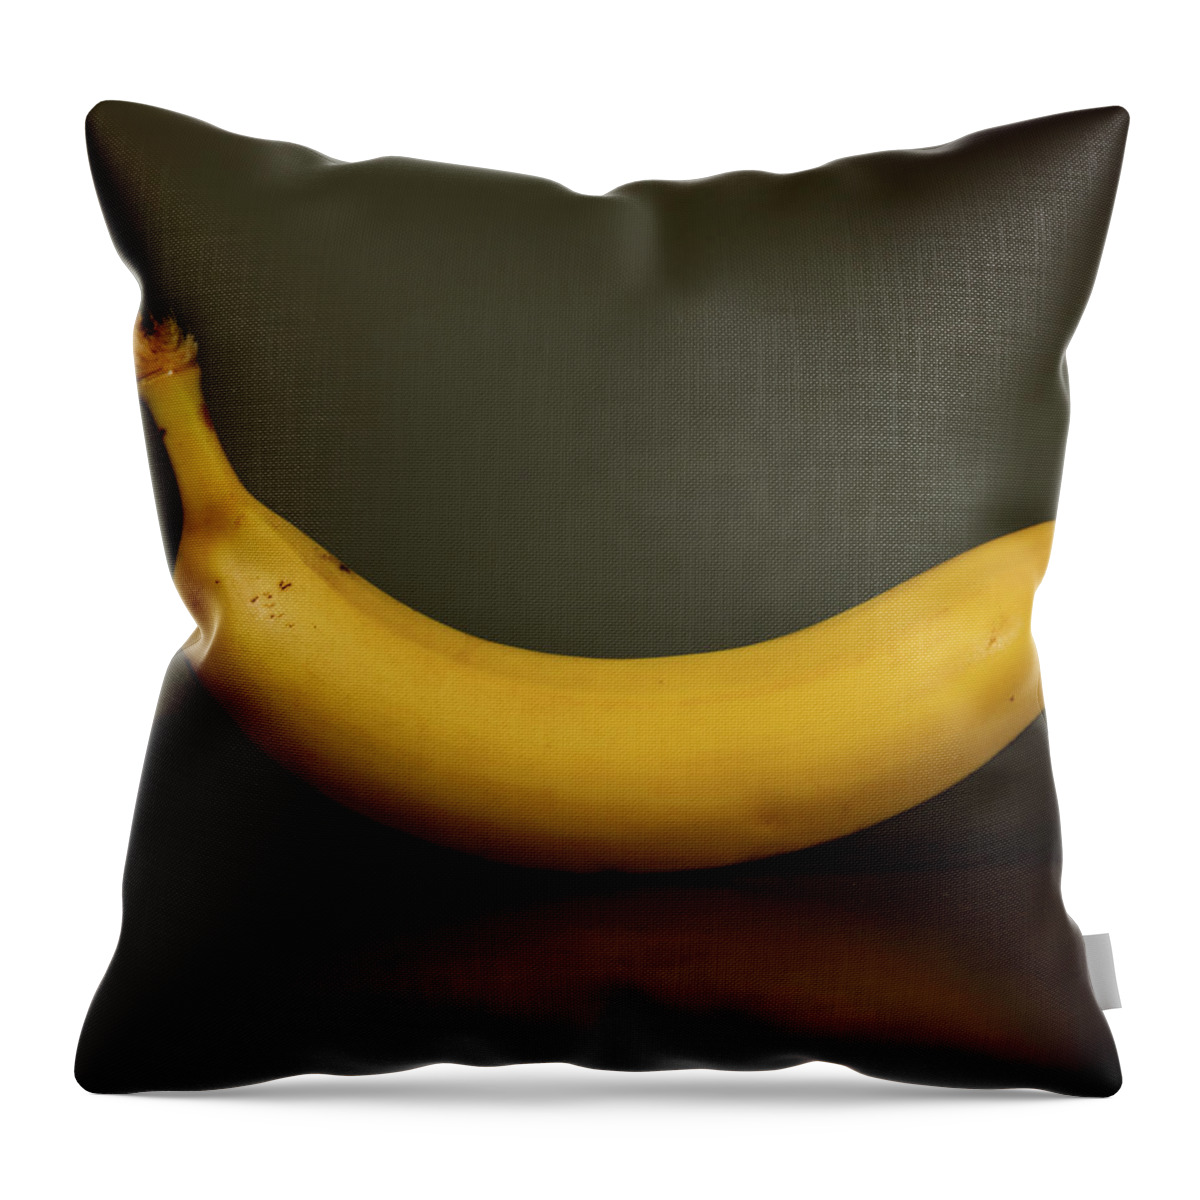 Fruit Throw Pillow featuring the photograph Banana In Elegance by Hyuntae Kim